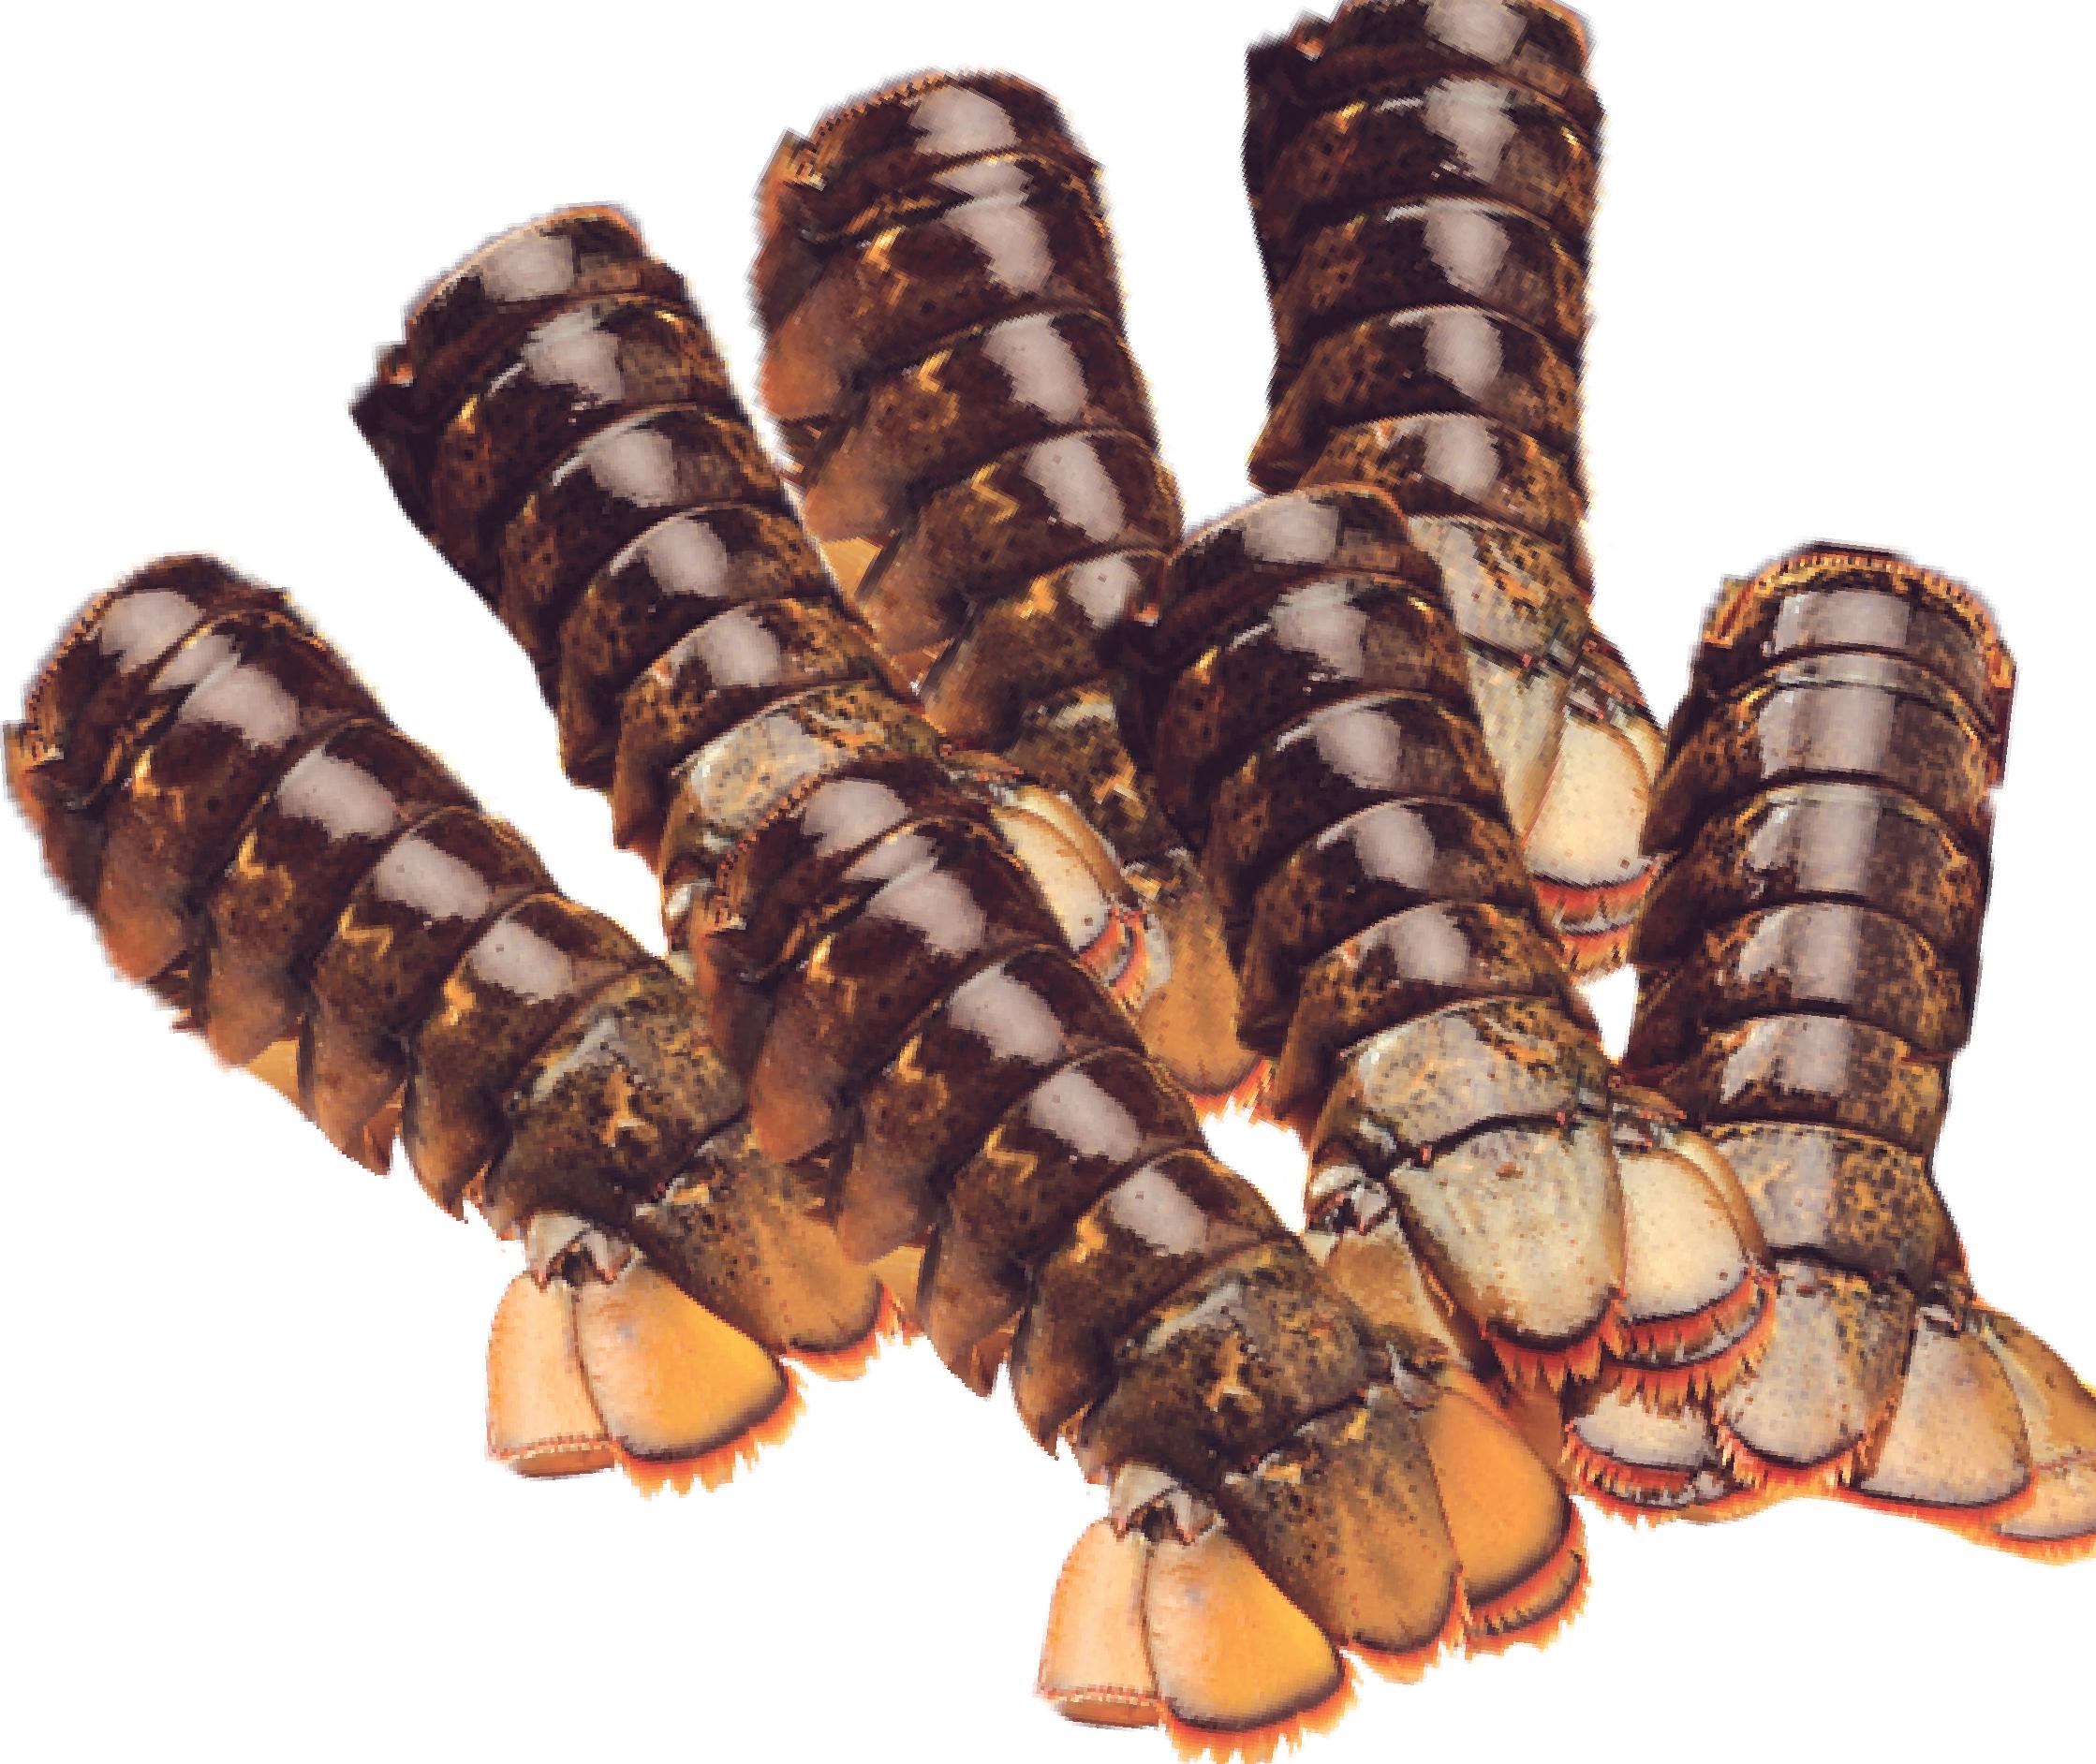 [OS-61] Lobster Tail [with shell/ uncooked] 7pcs 700g